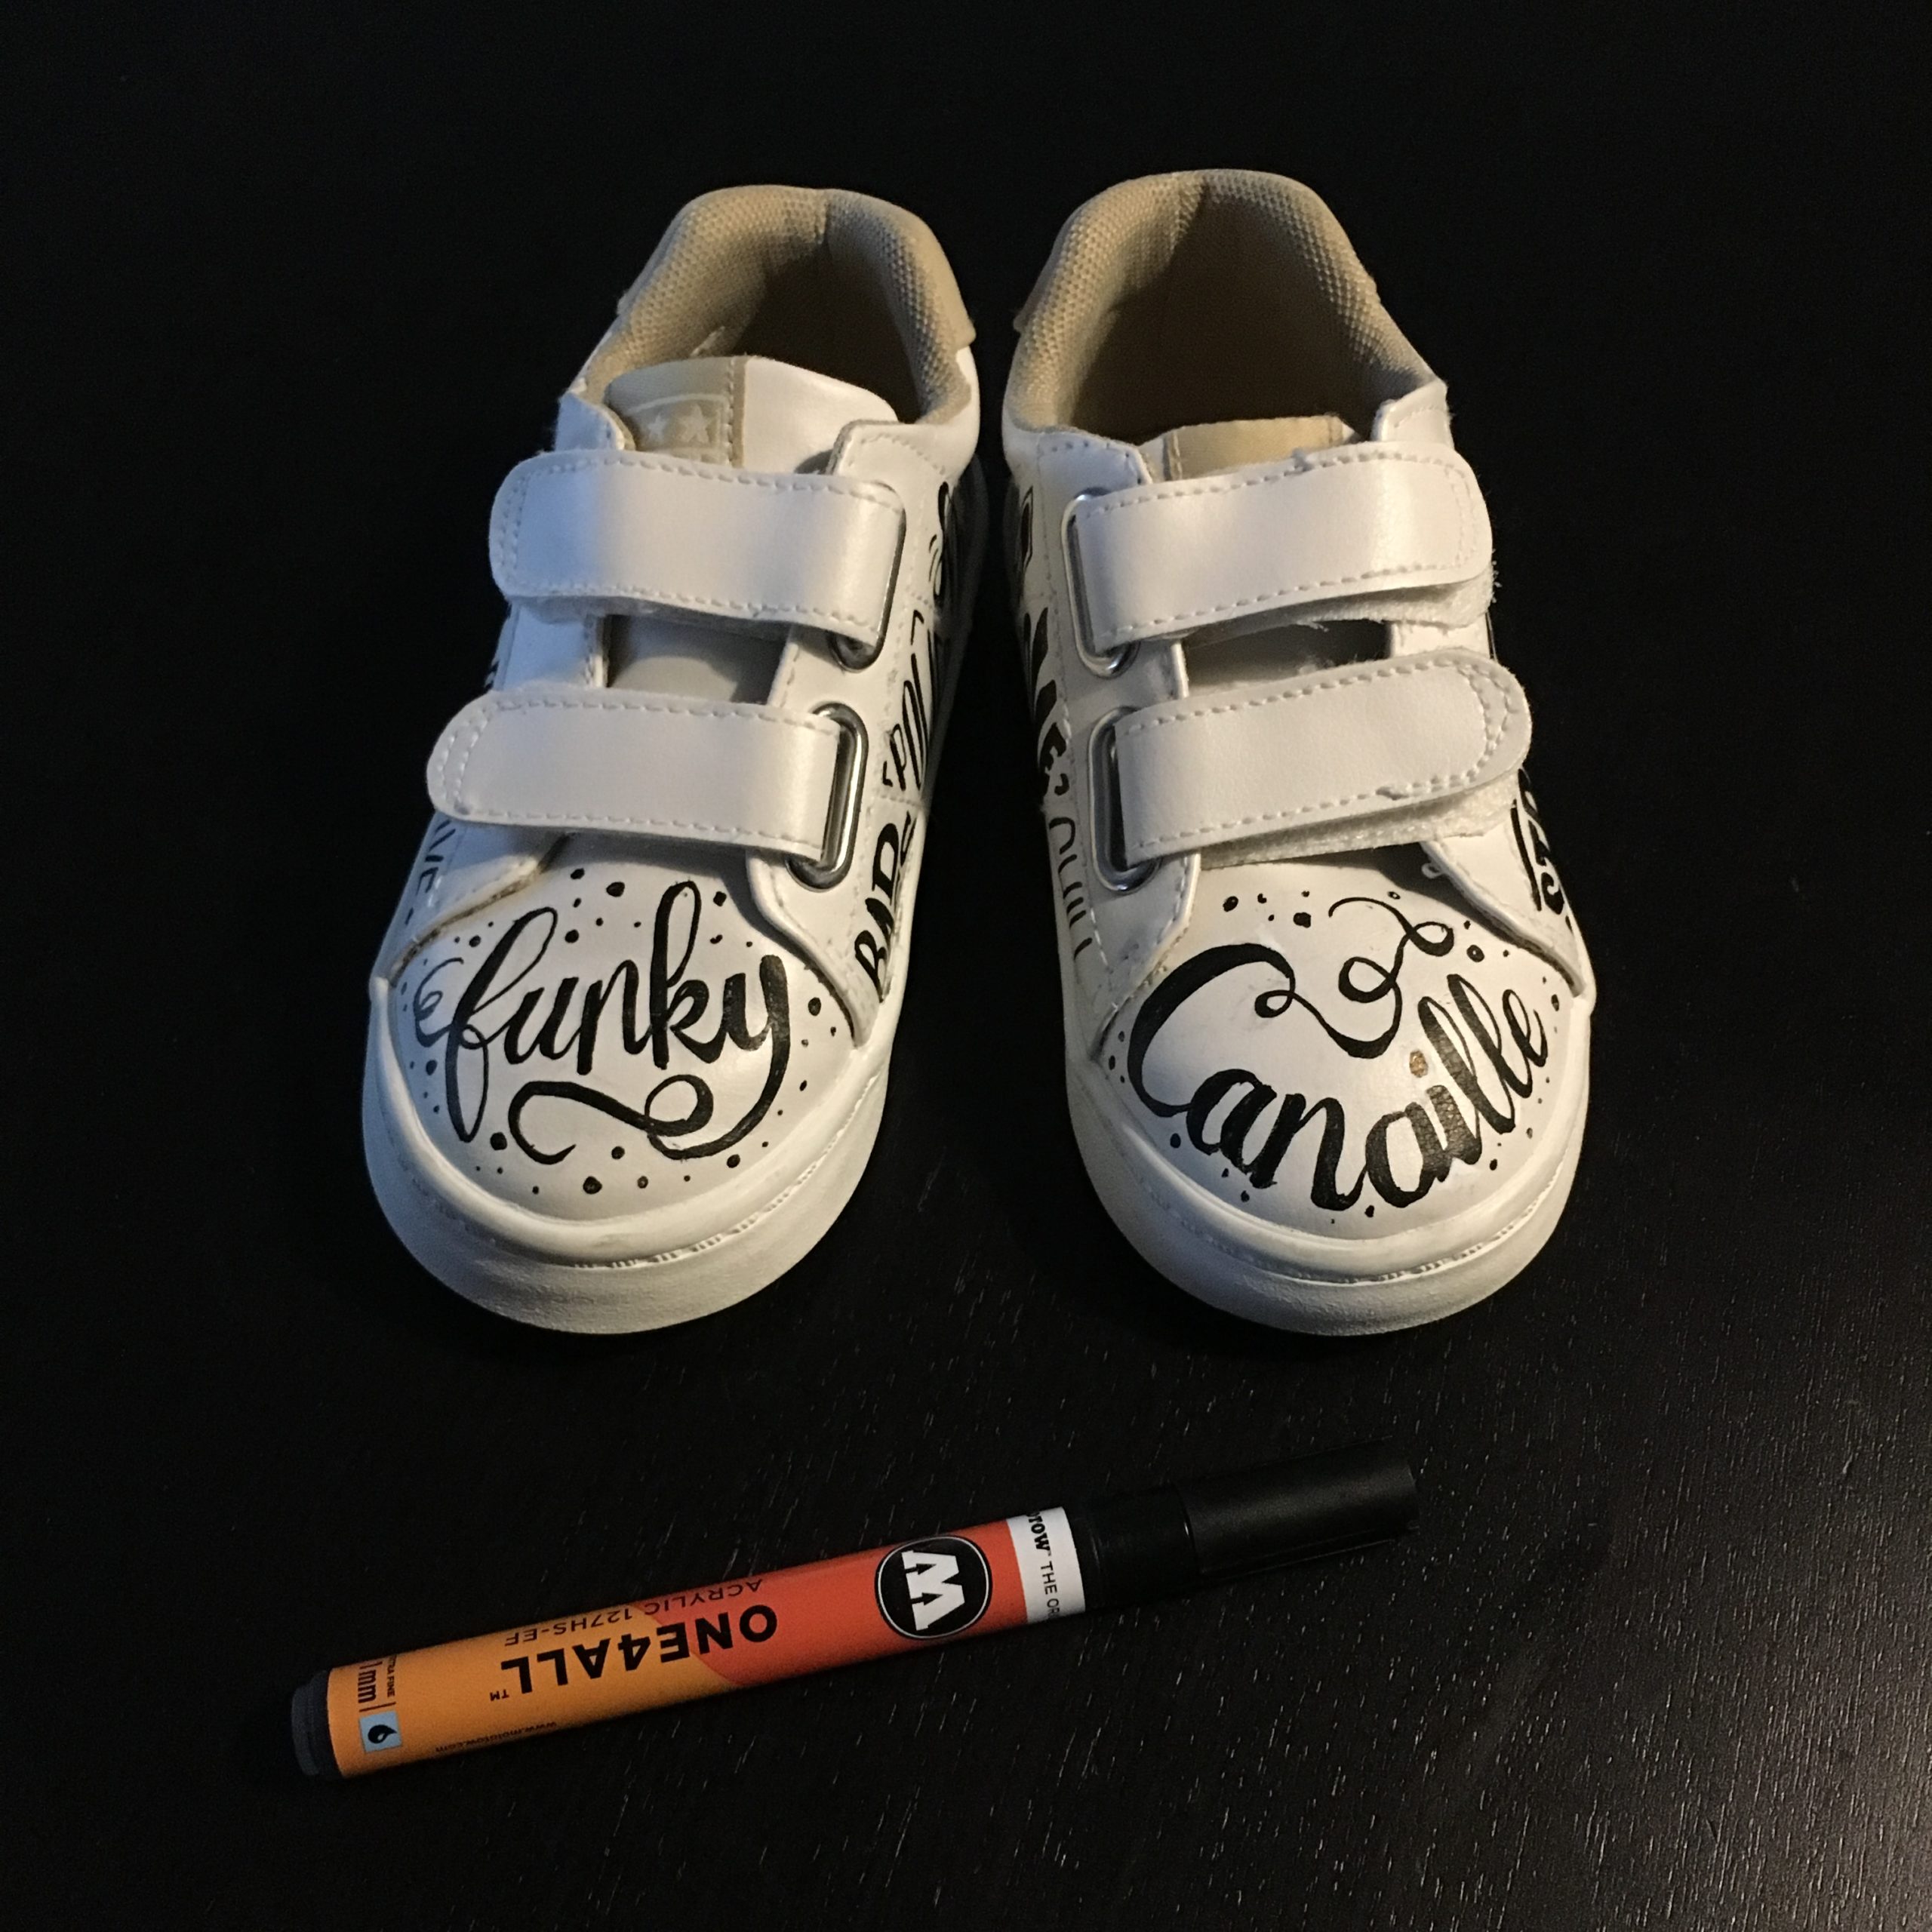 lettering on sneakers